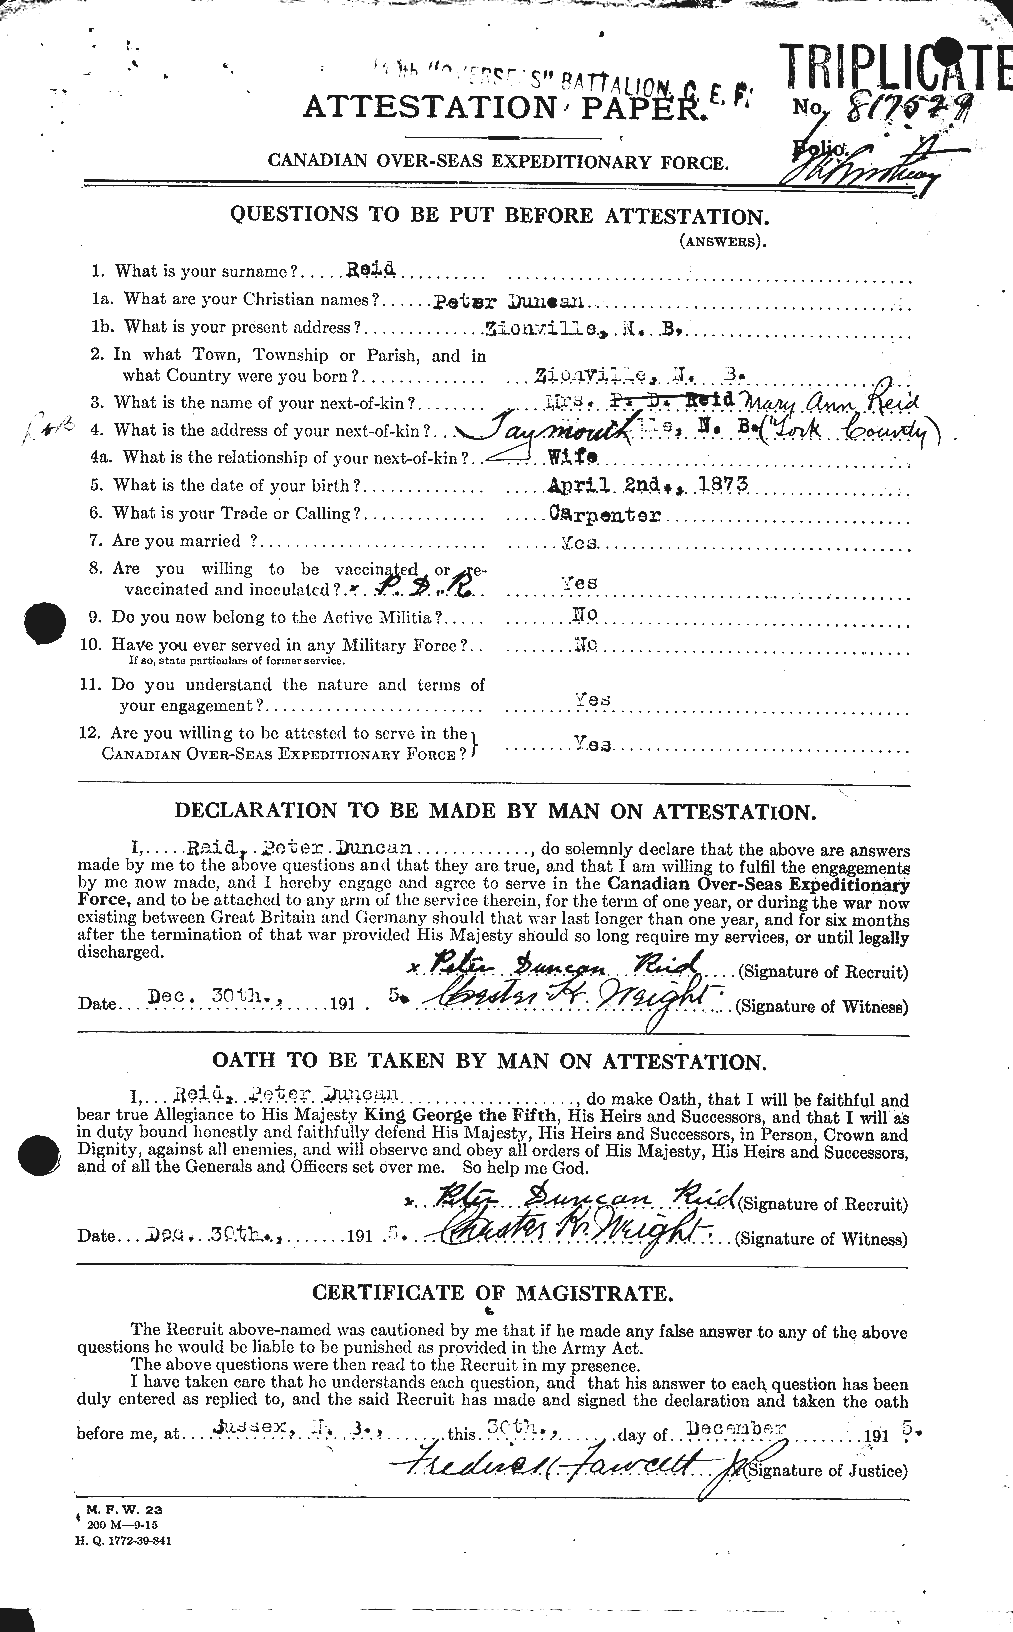 Personnel Records of the First World War - CEF 601841a